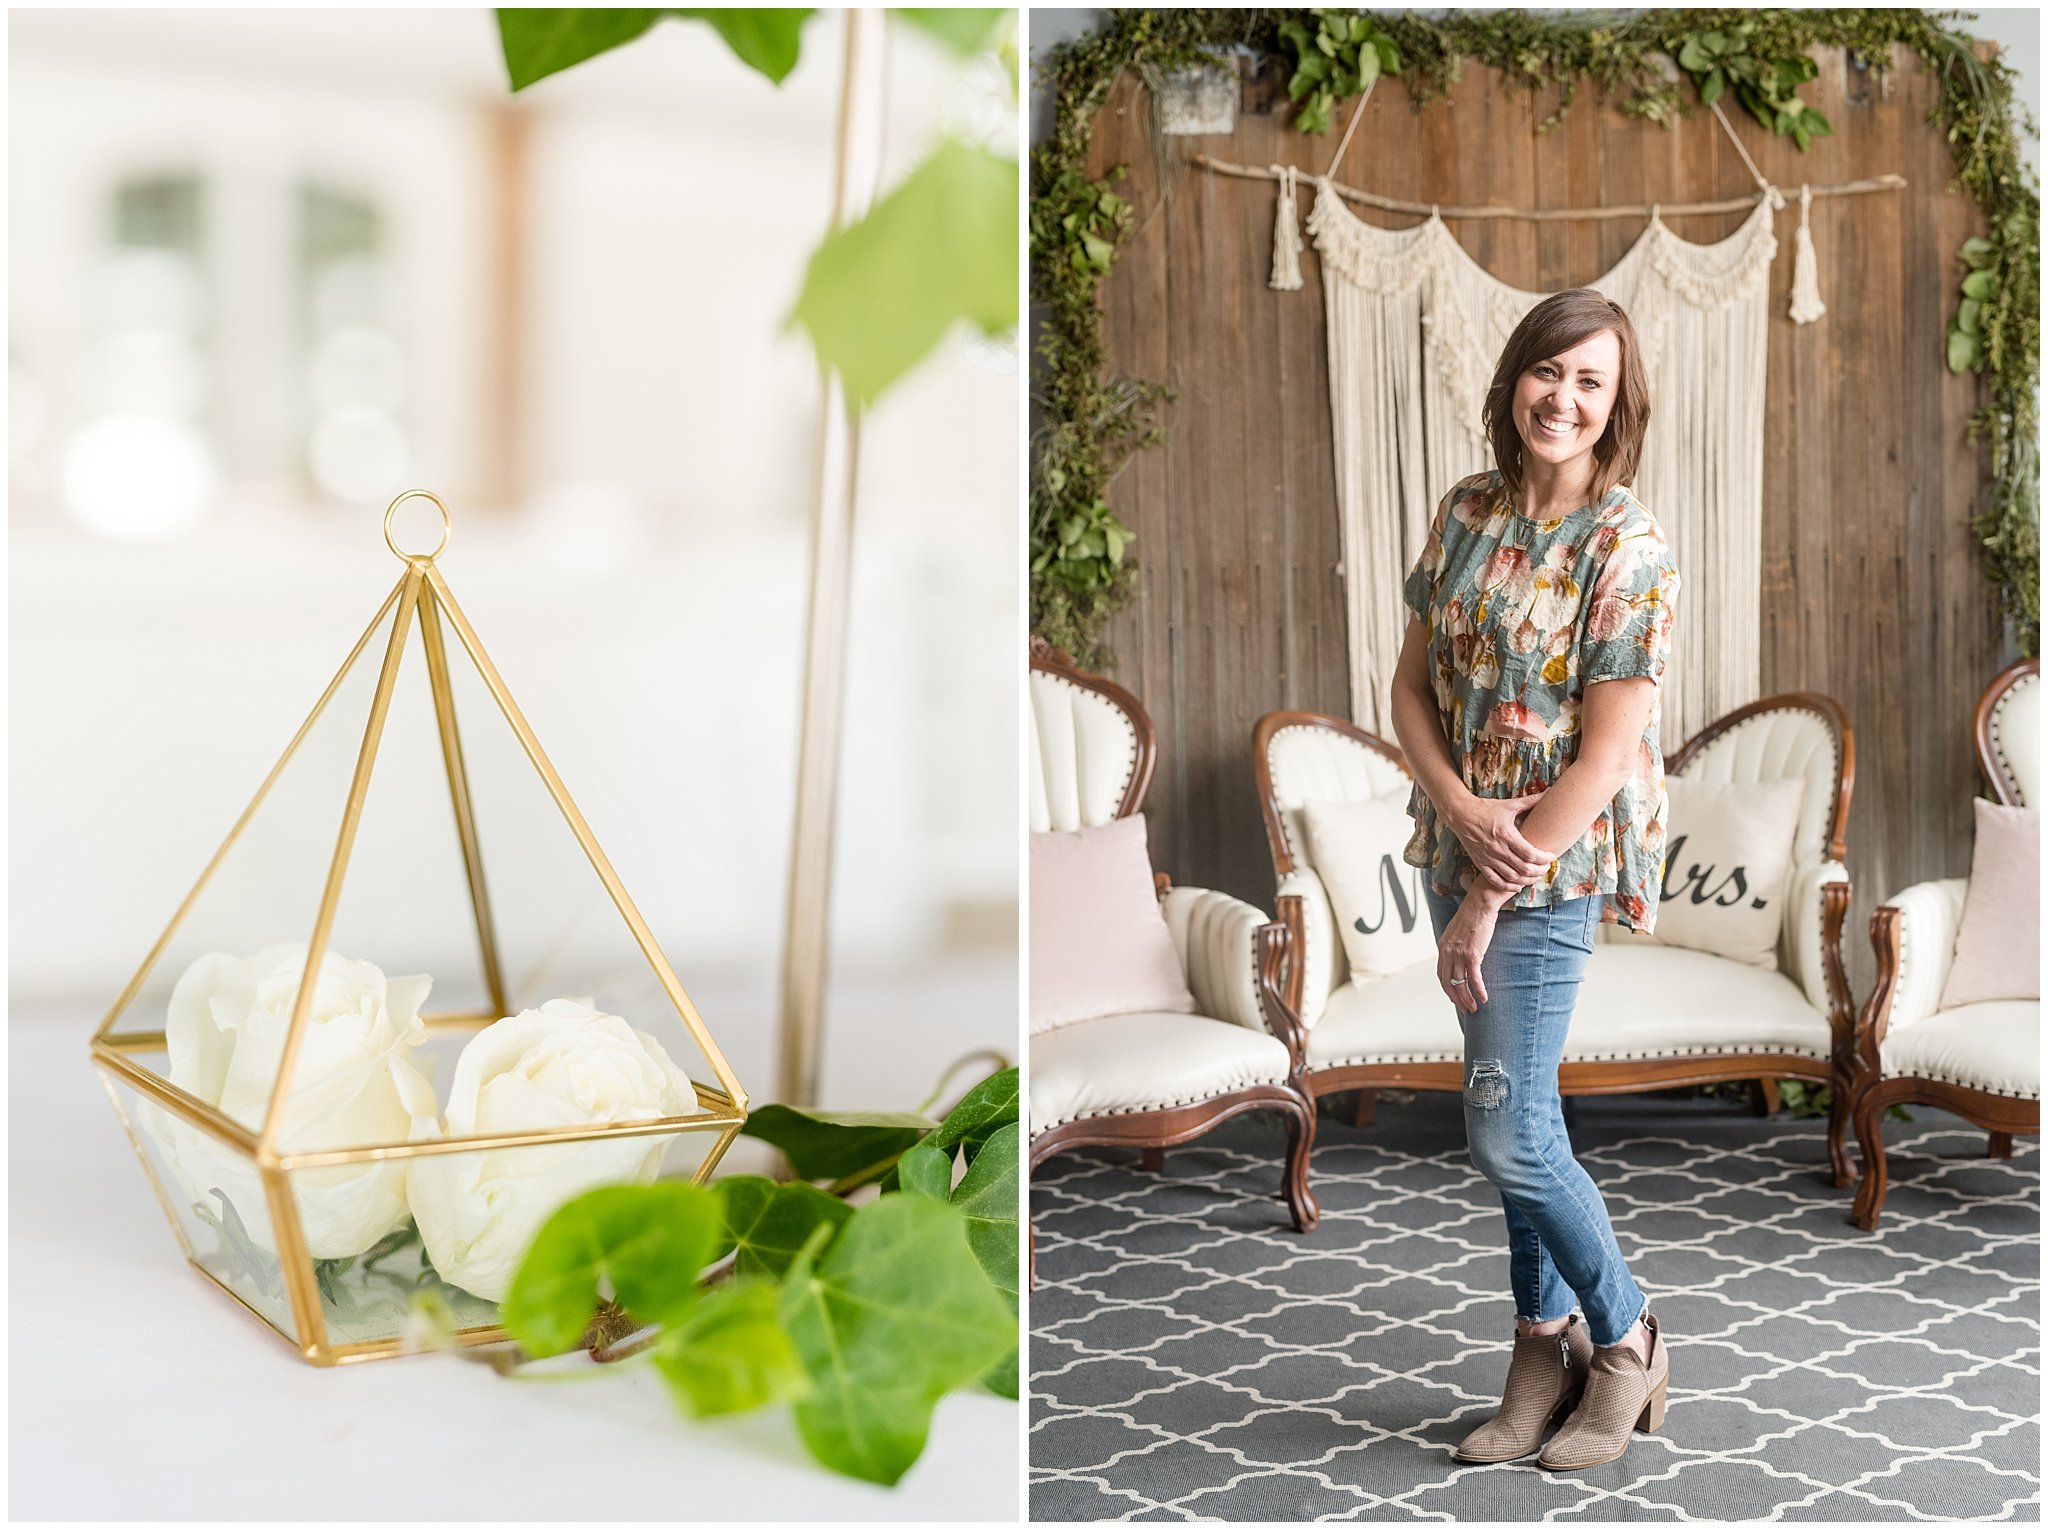 The Shabby Chic Sisters Decorations | 5 Tips to Find the Wedding Vendors That Are Right For You | Utah Wedding Photographers | Jessie and Dallin Photography